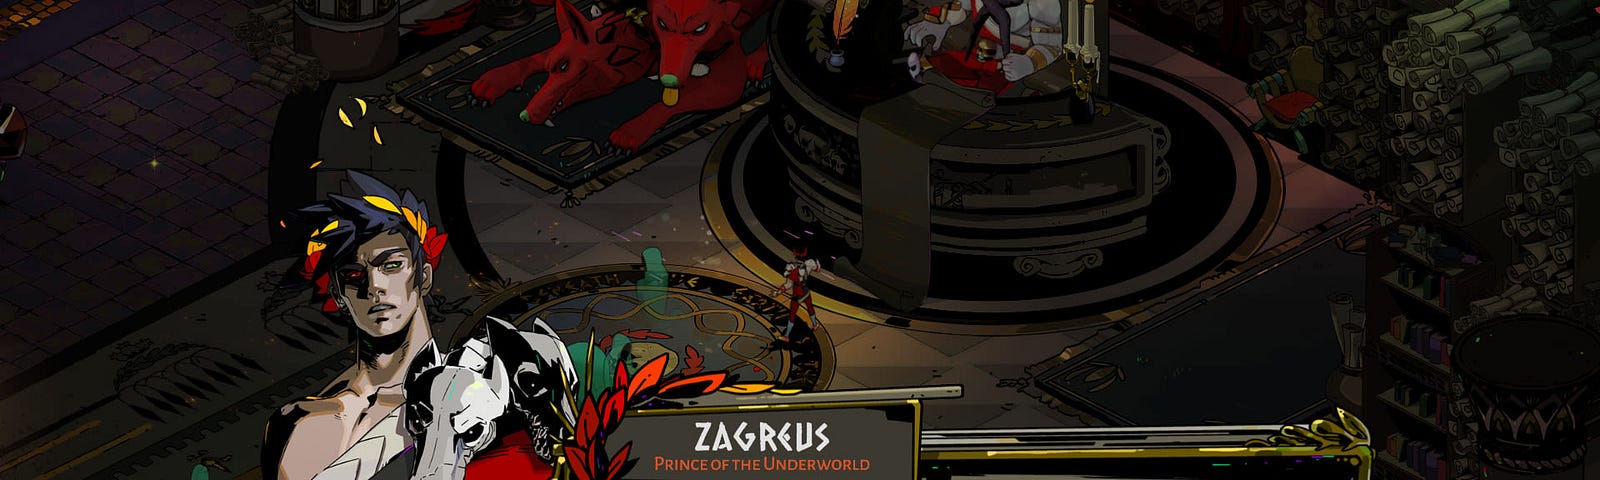 Screenshot of the game hades, with dialog by main character Zagreus talking to his father Hades